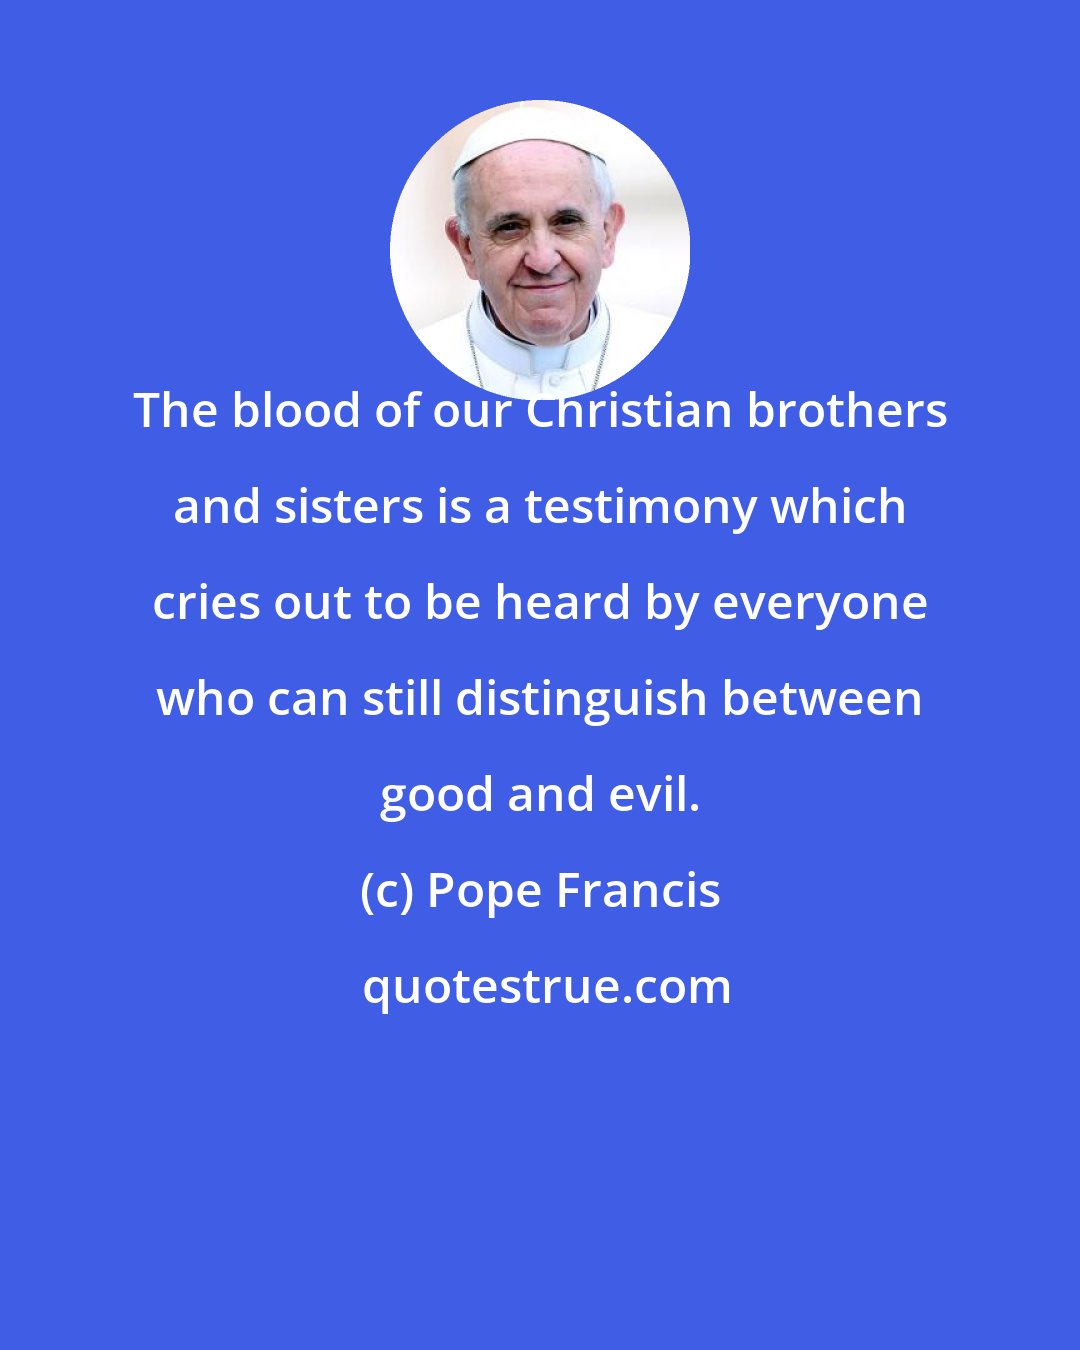 Pope Francis: The blood of our Christian brothers and sisters is a testimony which cries out to be heard by everyone who can still distinguish between good and evil.